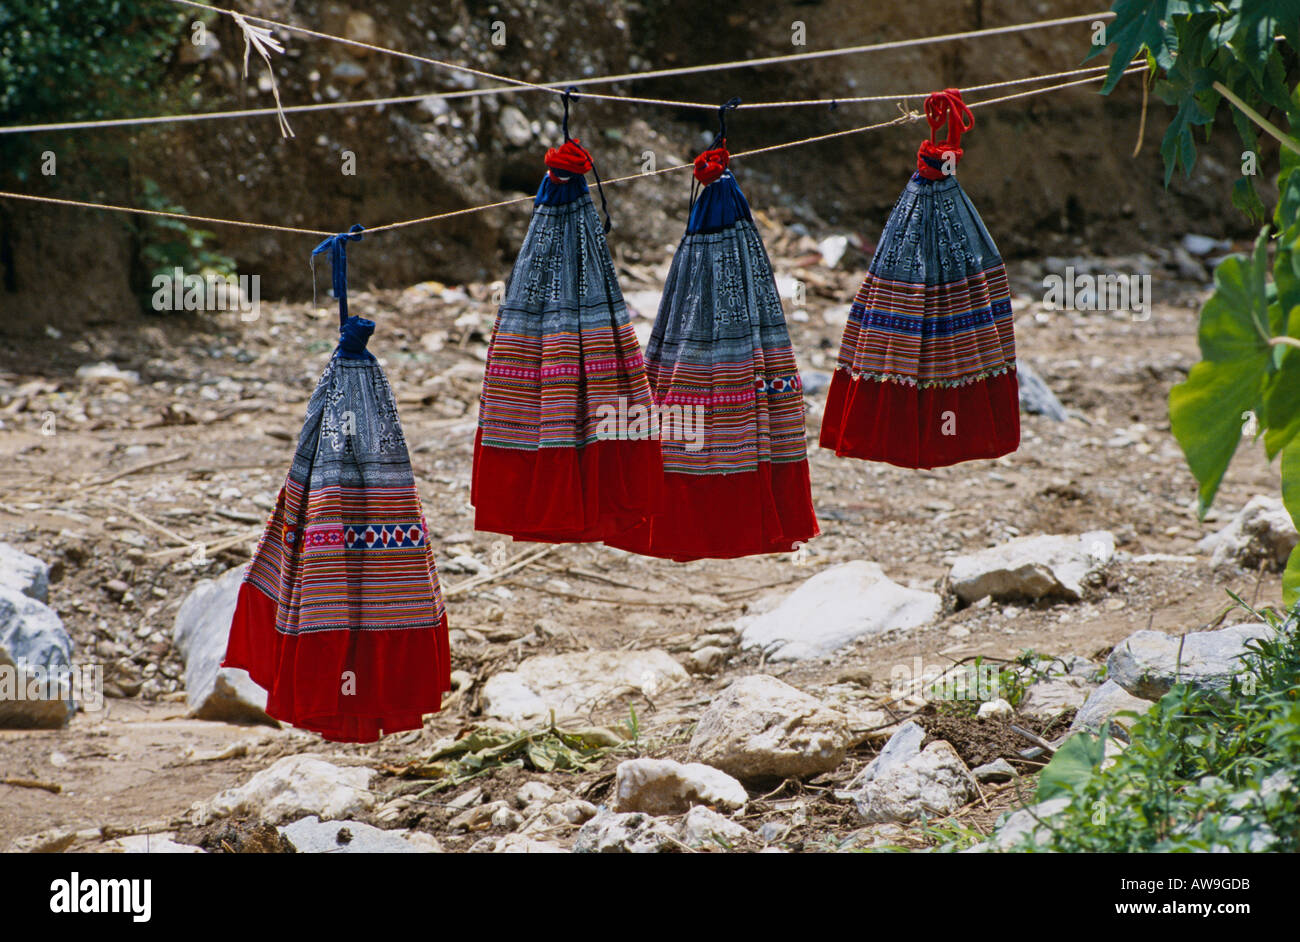 Skirts drying at Coc Ly market, Northern Vietnam Stock Photo